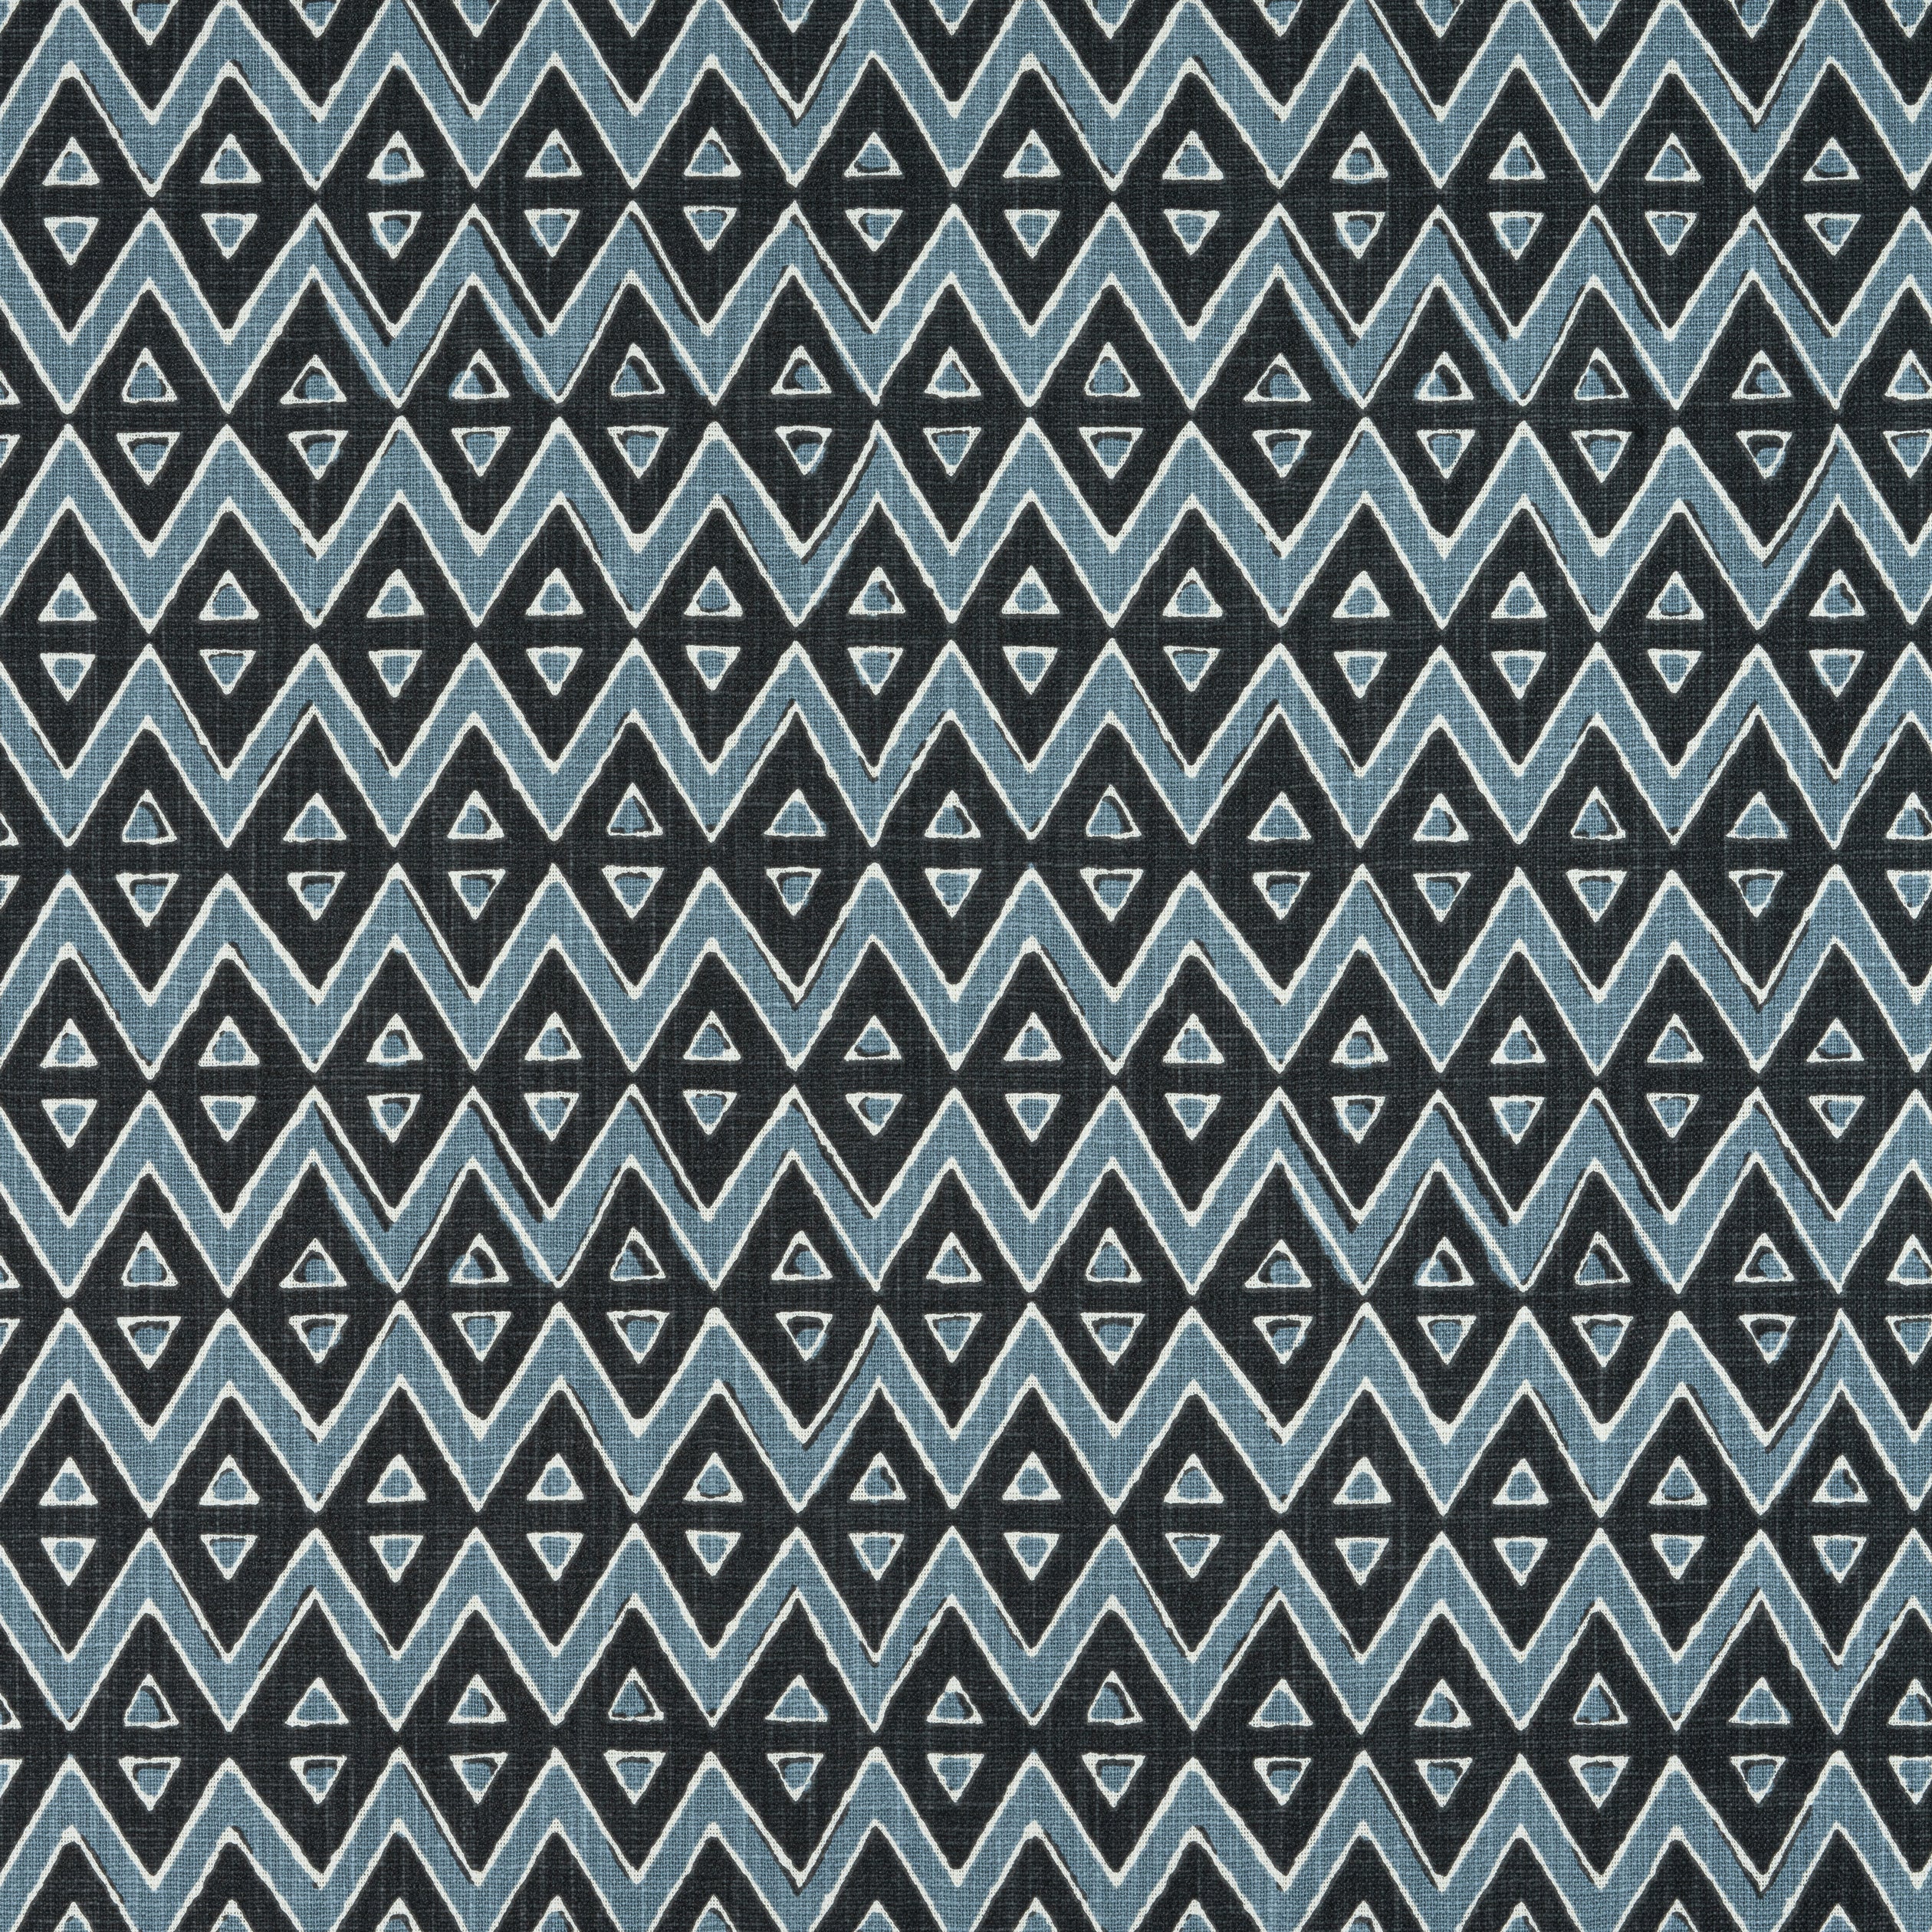 Tiburon fabric in black and mineral blue color - pattern number F913233 - by Thibaut in the Mesa collection